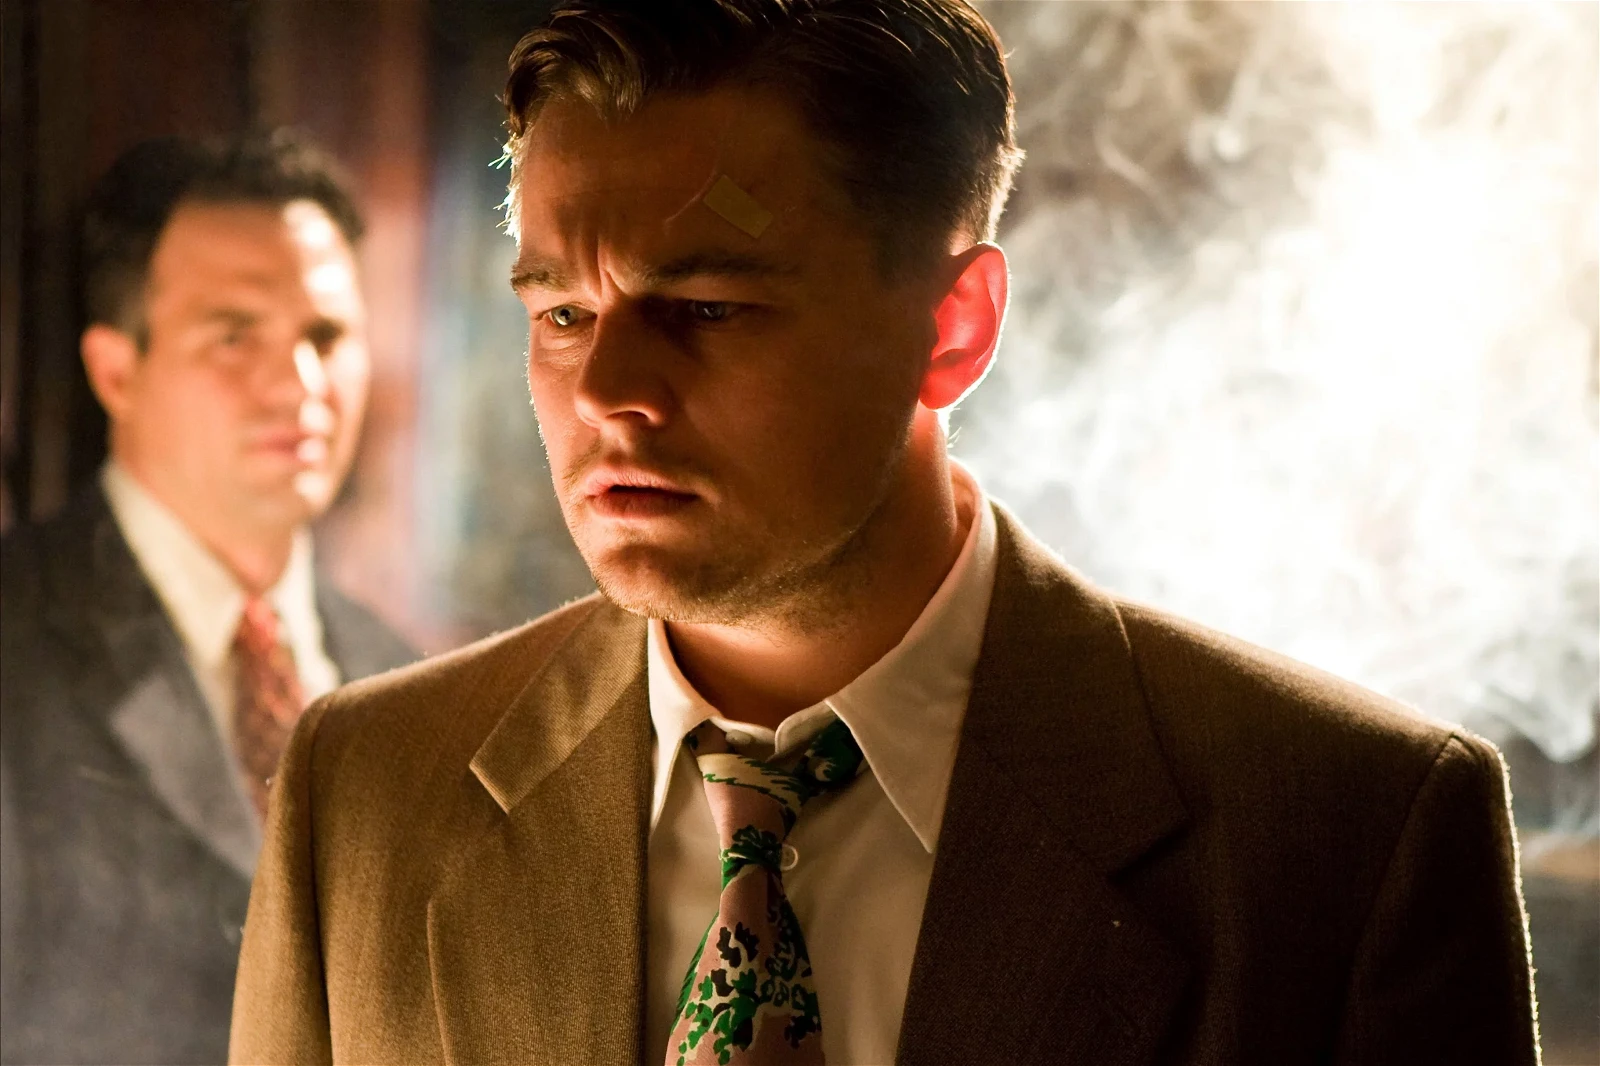 Leonardo DiCaprio has starred in many famous movies in great roles.